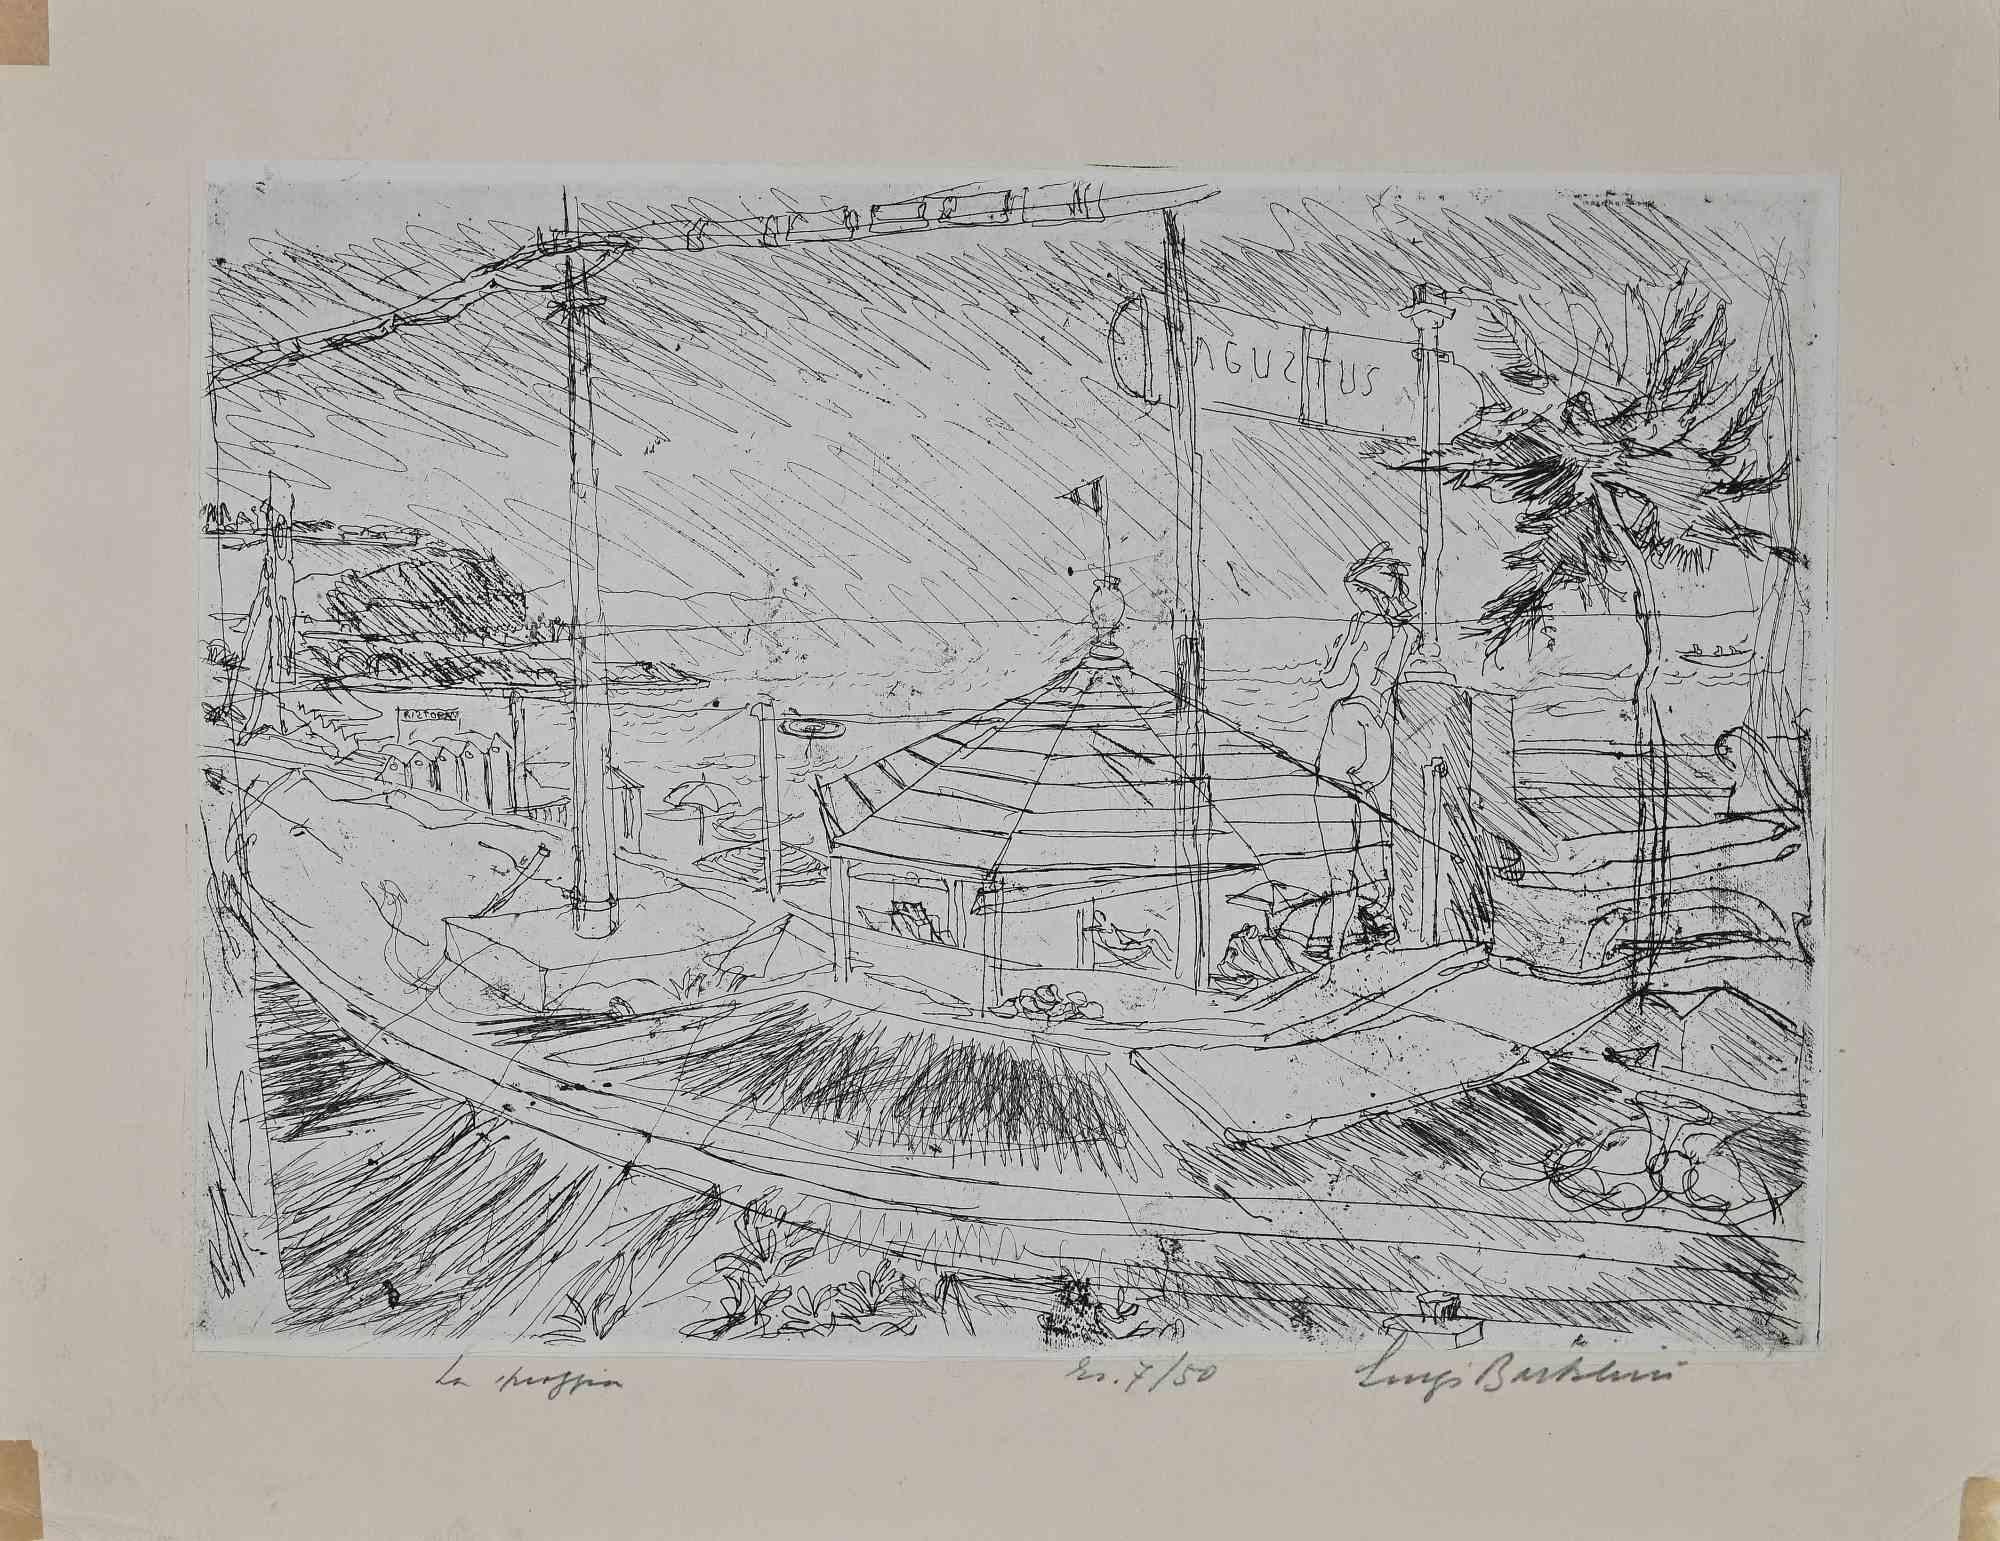 La spiaggia is an original artwork realized by the Italian artist Luigi Bartolini (1892-1963) in 1950.

Black and white Etching.

Hand-signed, titled and numbered ( 7/50 ) in pencil on the lower margin. Edition of 50 prints.

Reference:

1951 C.A.